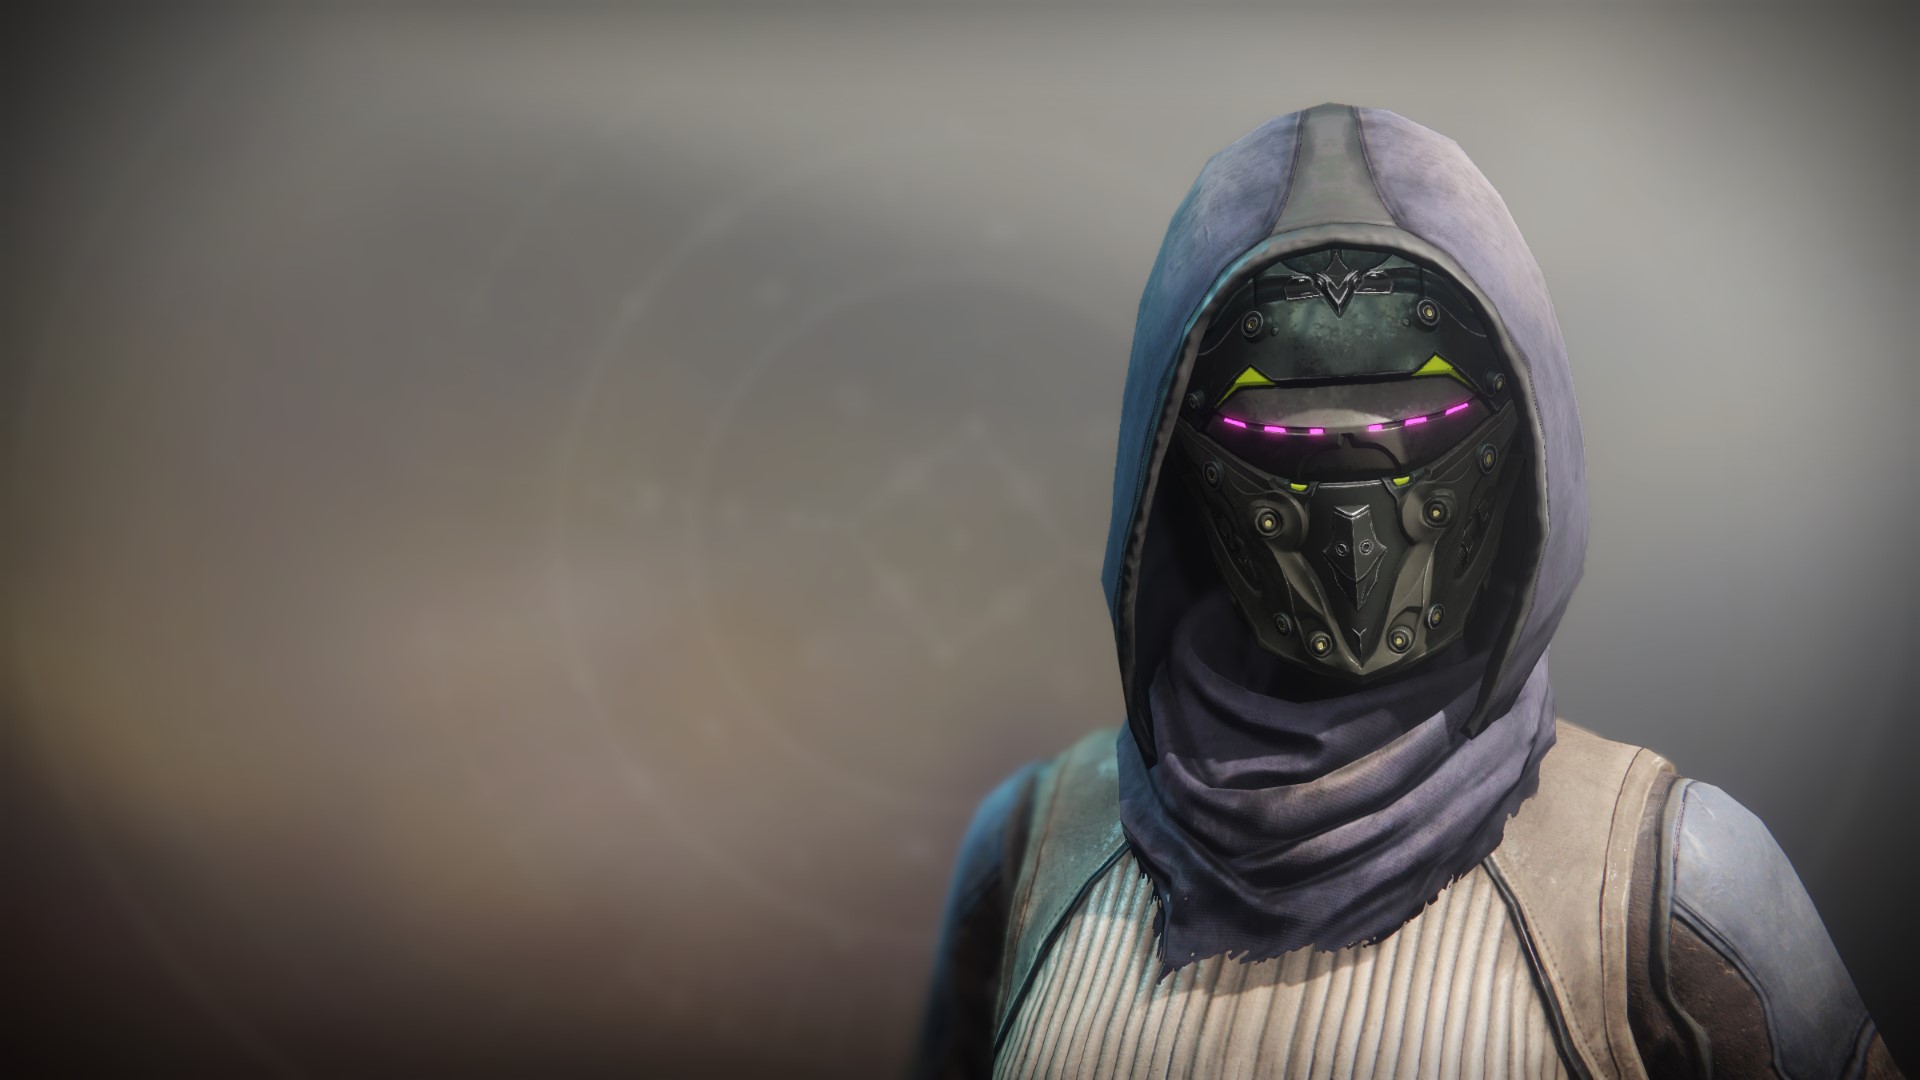 An in-game render of the Virulent Mask.